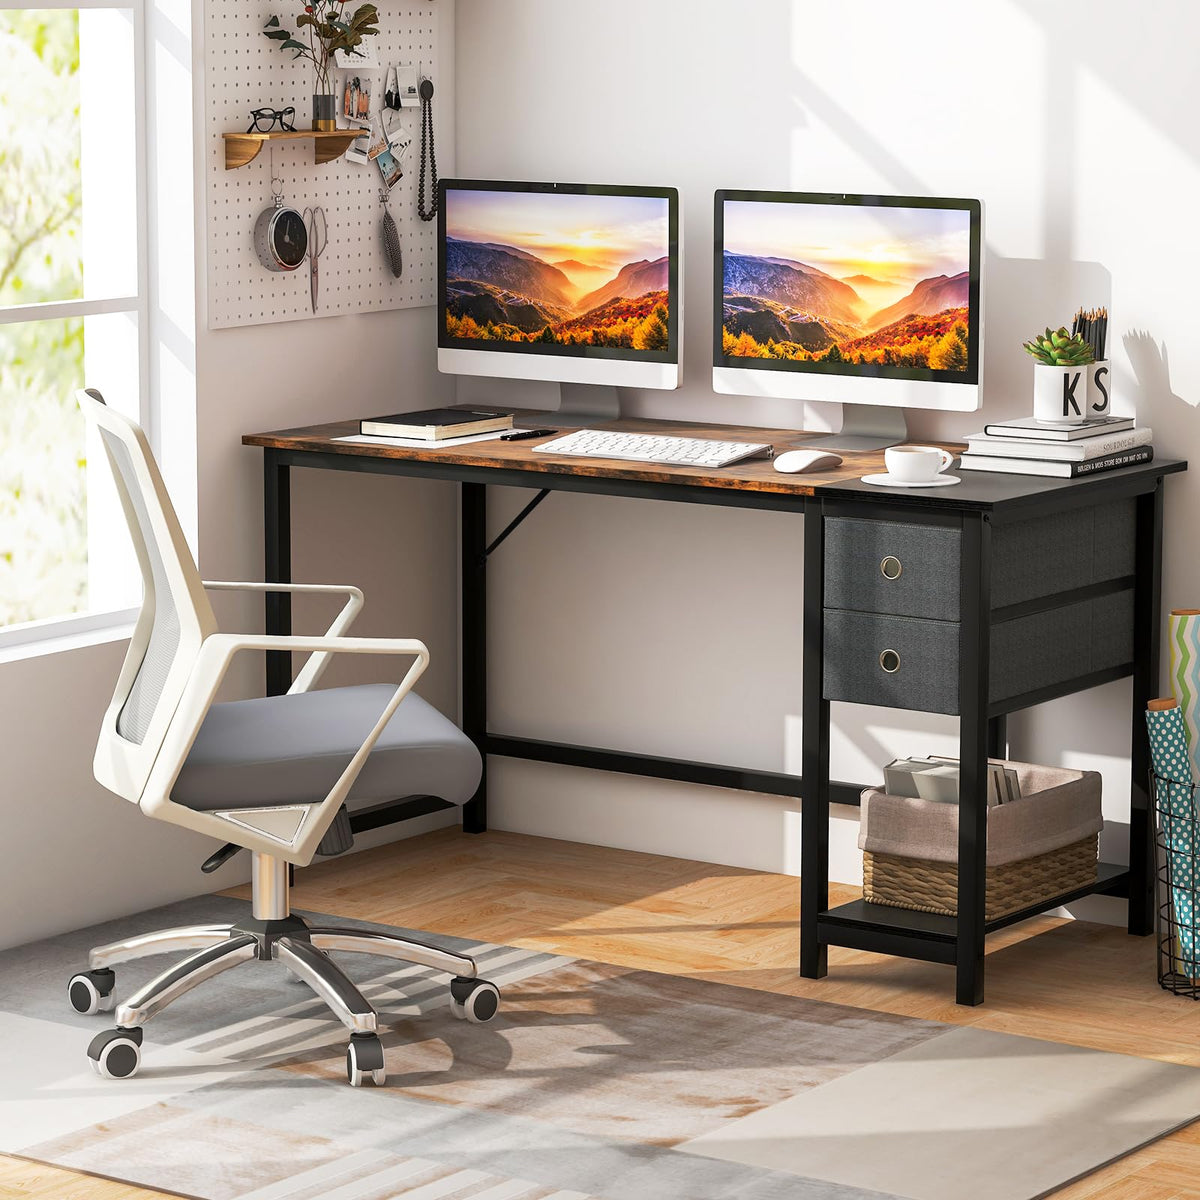 Giantex 120 cm Home Office Desk, Modern Computer Workstation with 2 Drawers